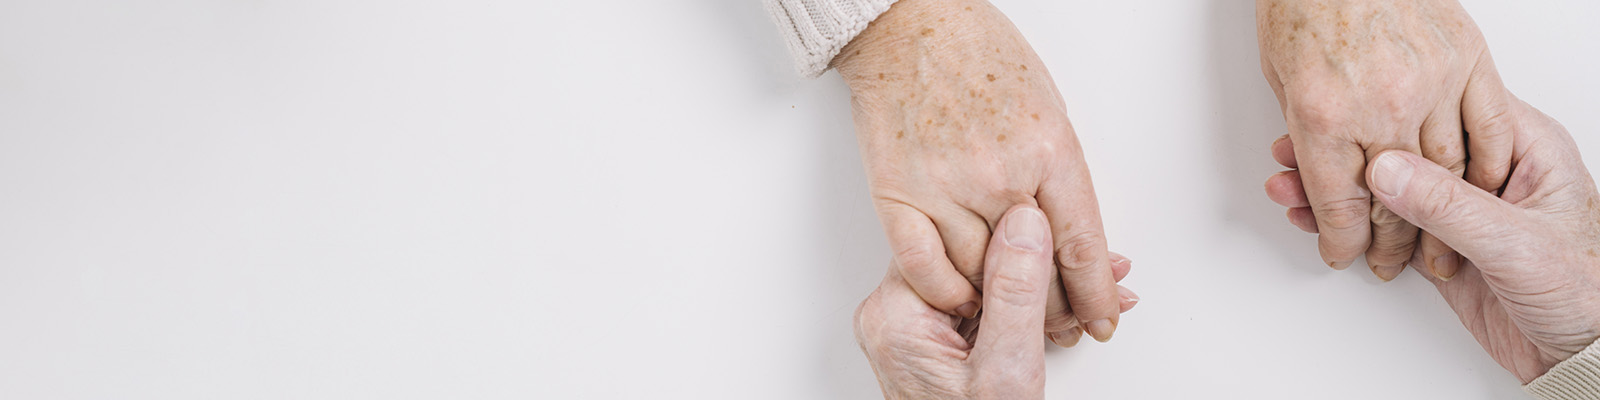 Helpful Tips for When a Loved One With Dementia Refuses to Take Medicine